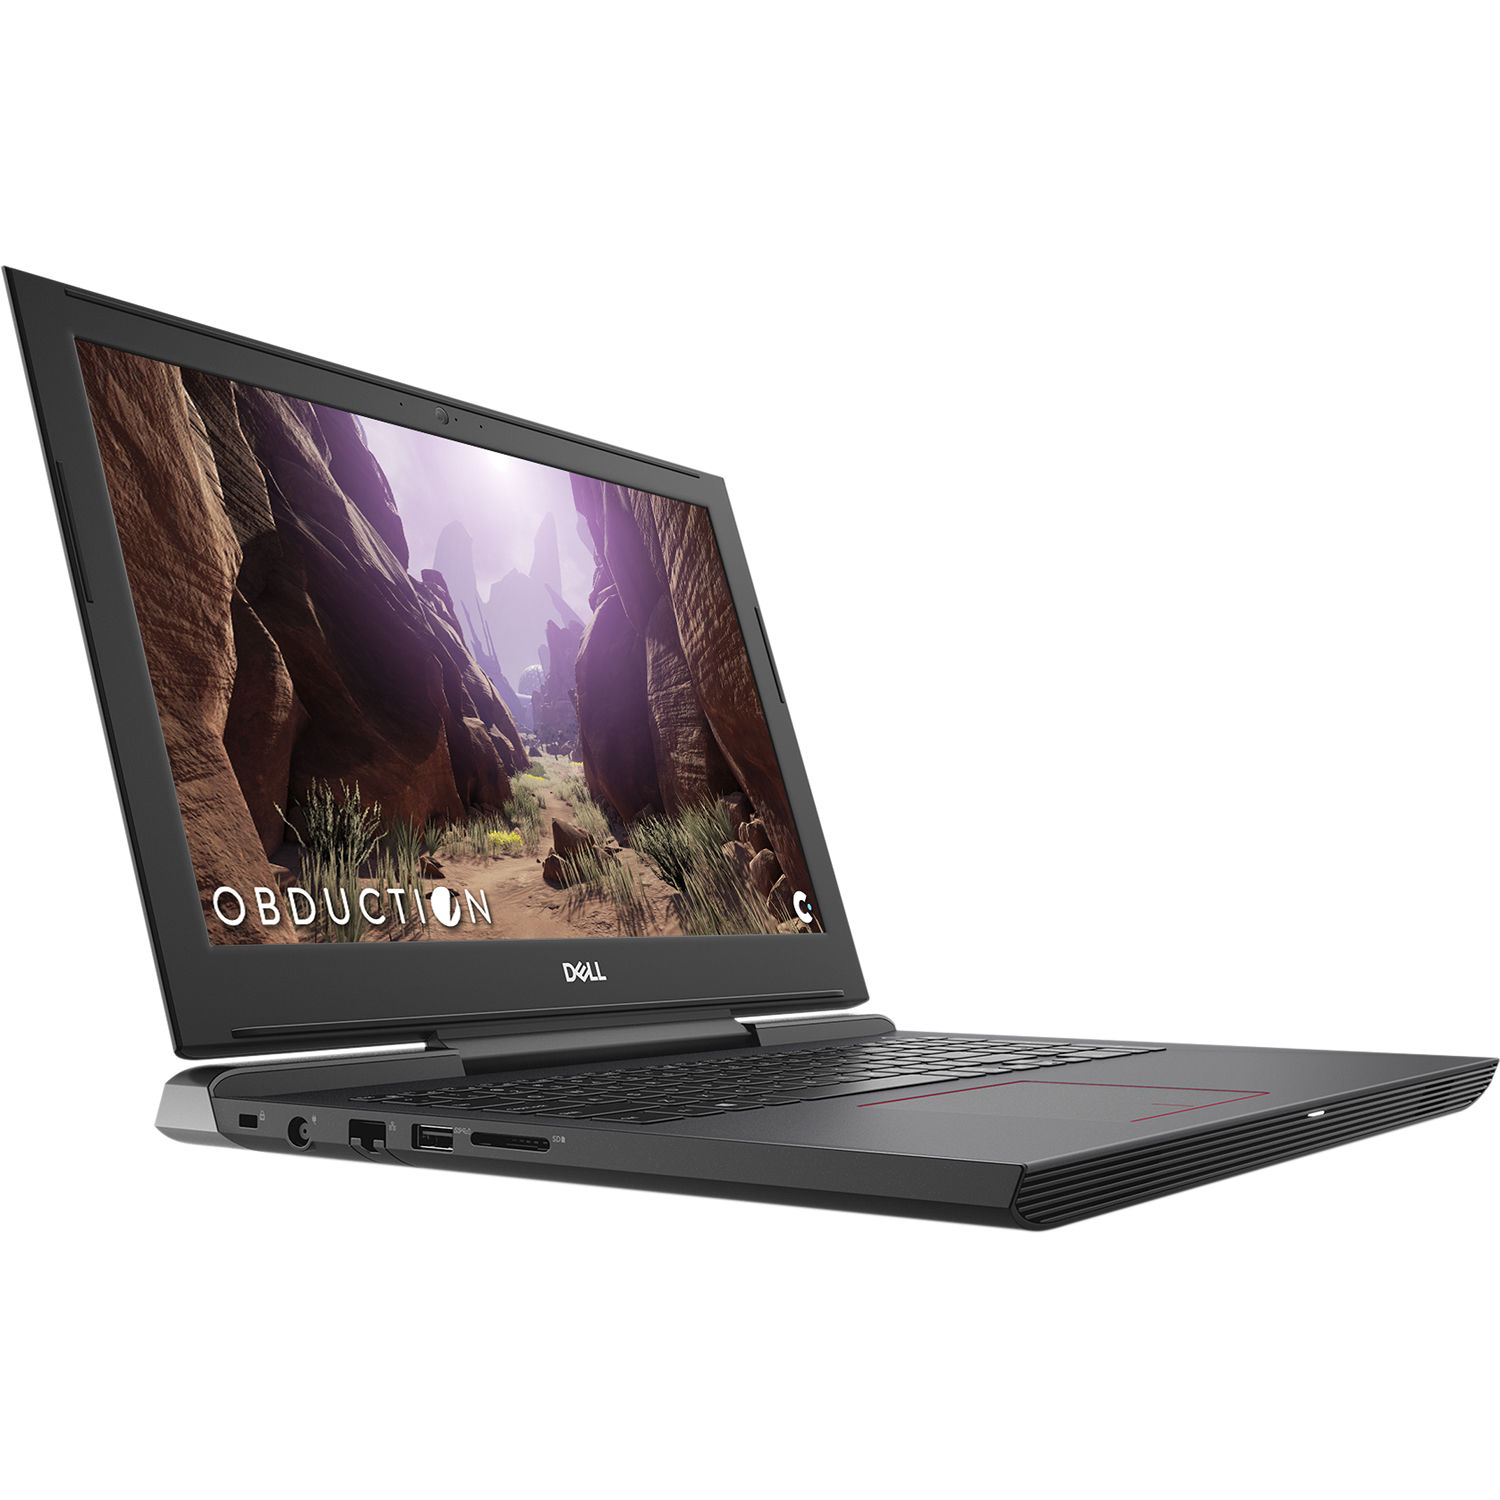 Dell Inspiron 15 7577 15.6 inch Gaming Laptop, Intel Core i5-7300HQ, 8GB Memory, 128GB Solid State Drive + 1TB HDD, NVIDIA® GeForce® GTX 1060 - image 1 of 23